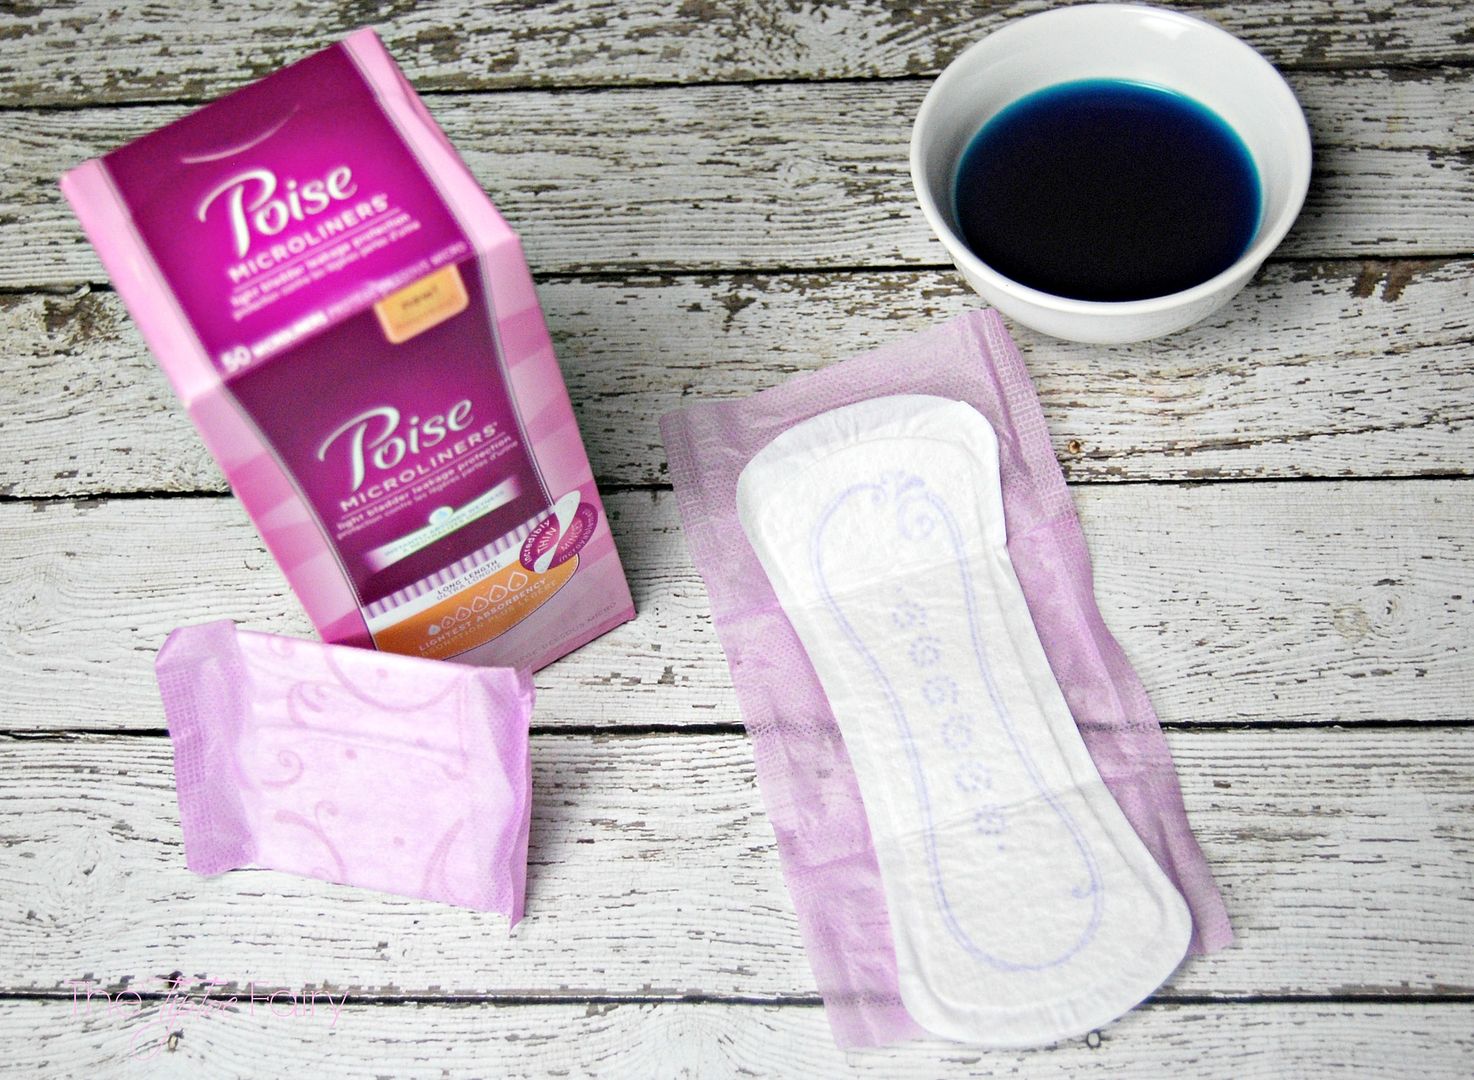 Light Bladder Leakage with Poise Microliners | The TipToe Fairy #sp #LBL #poise